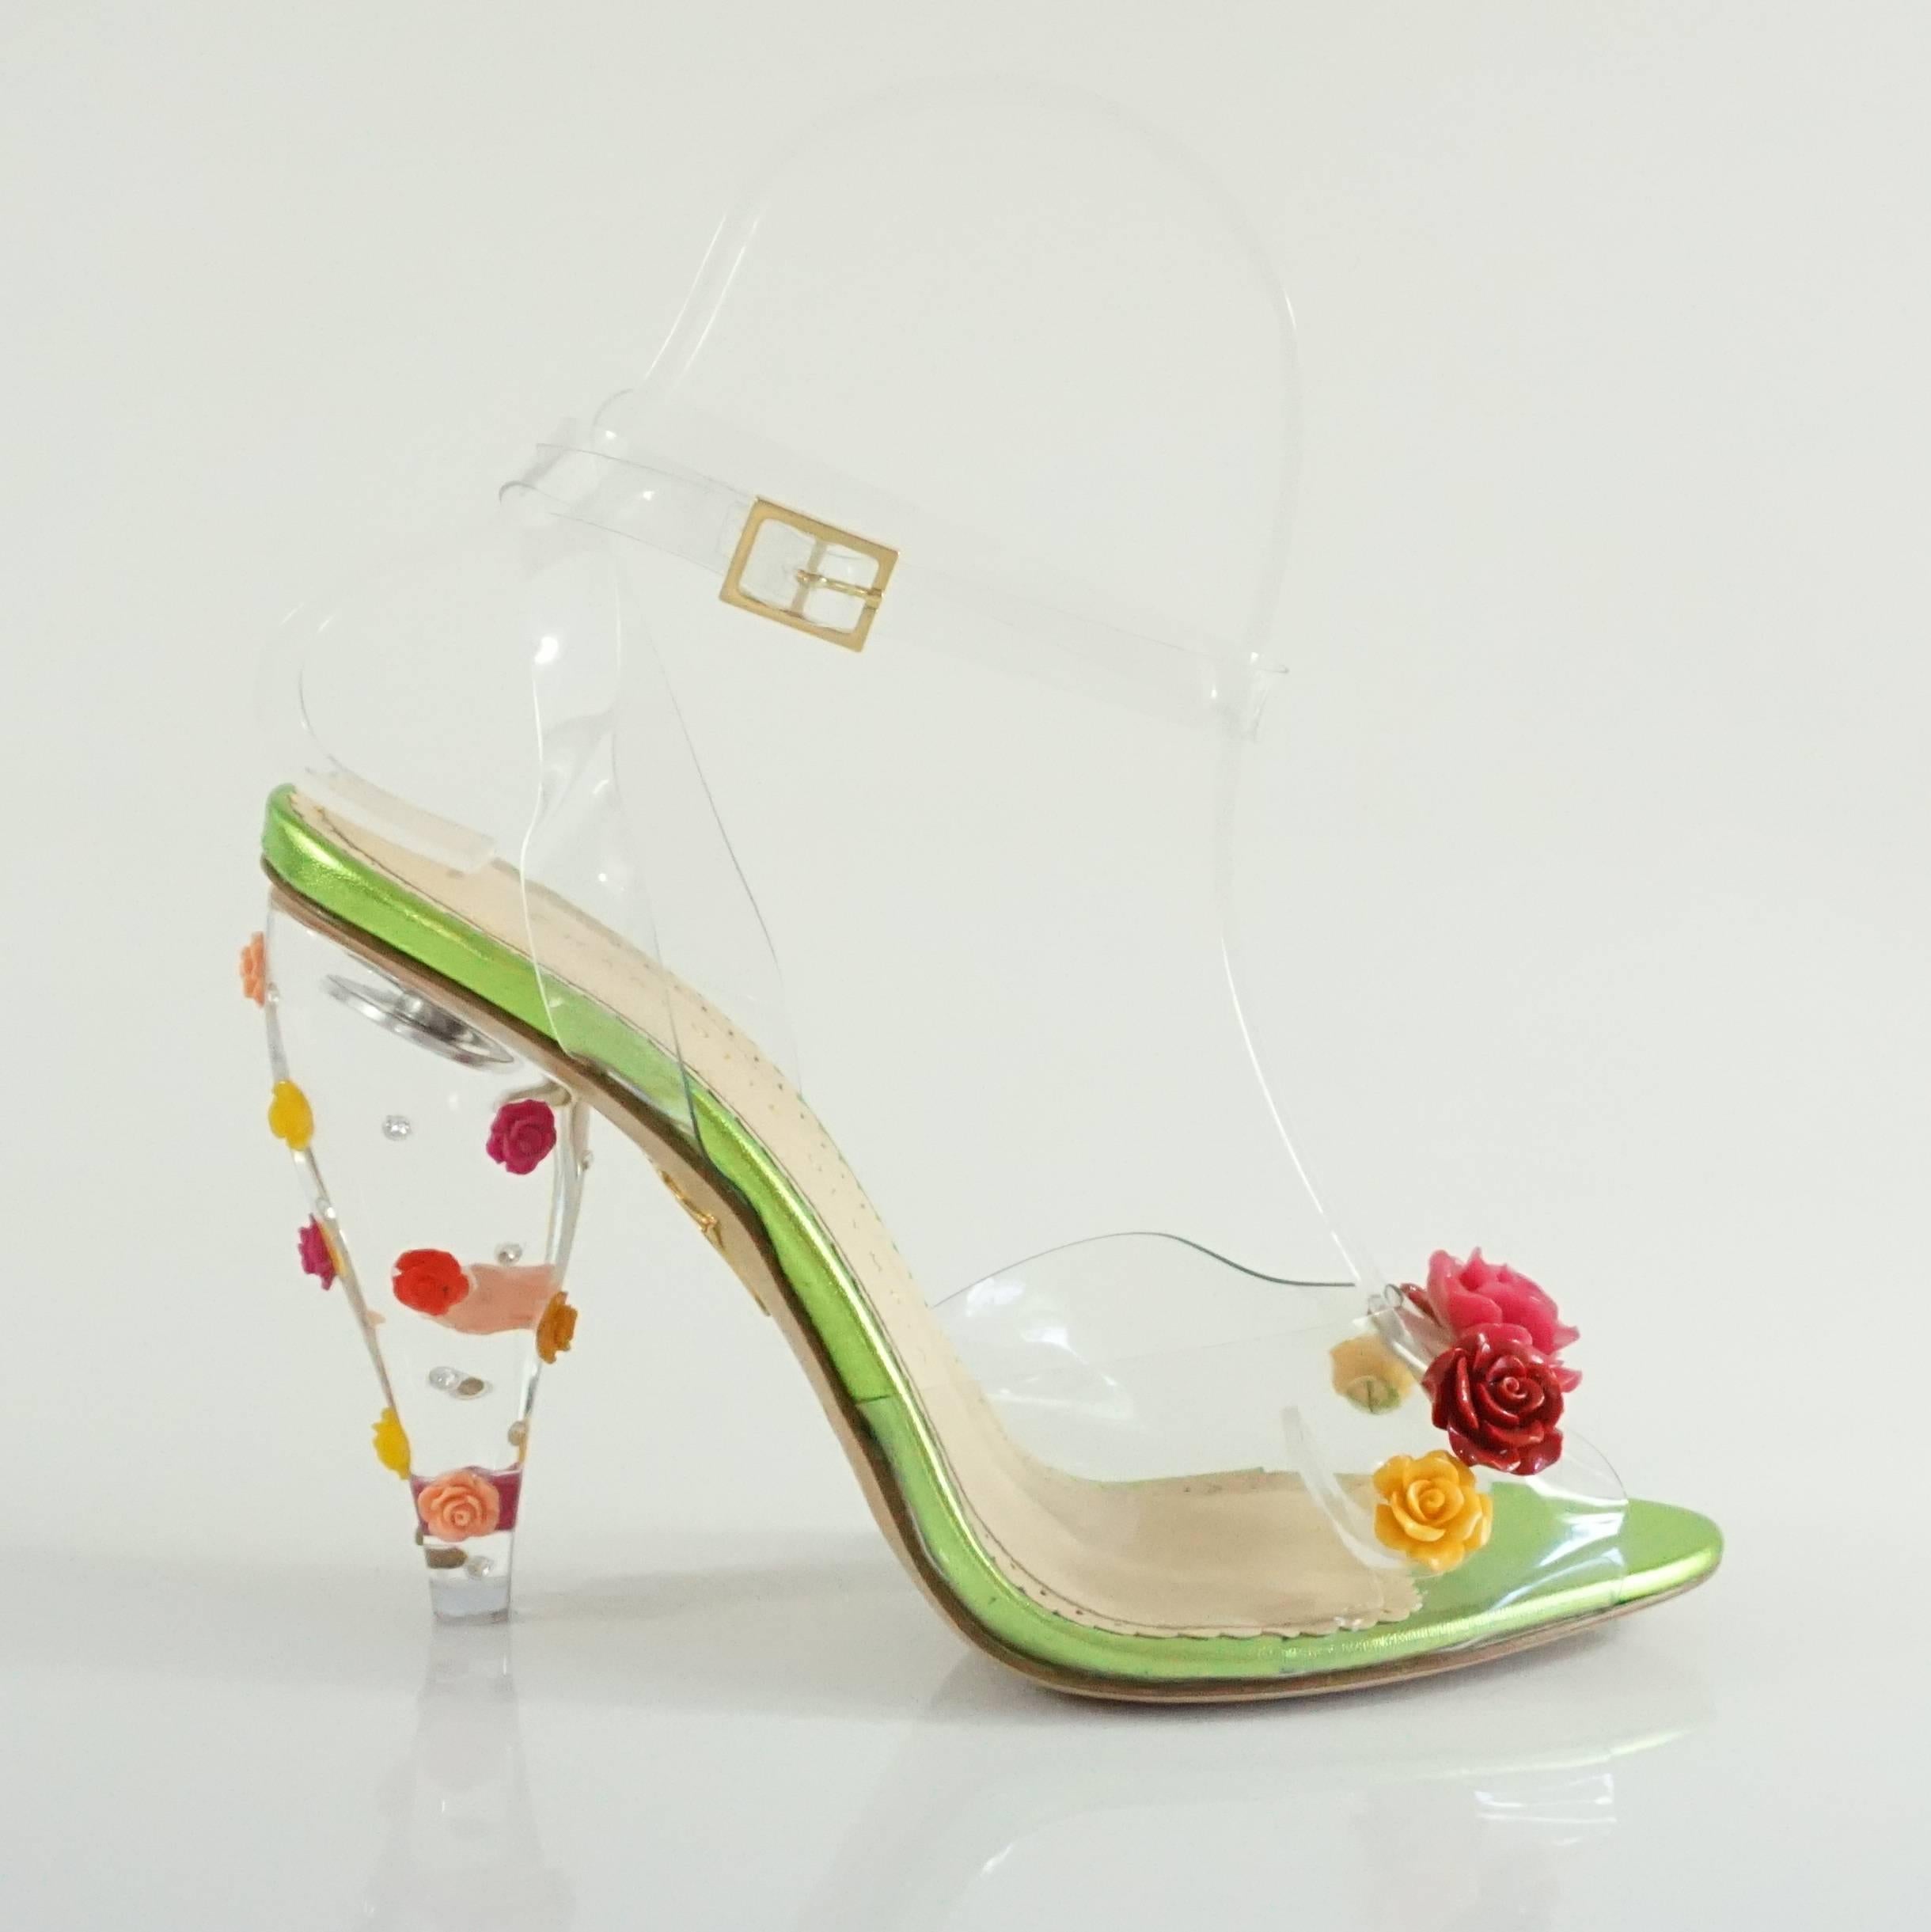 These Charlotte Olympia heels have a clear heel, strap and toe band. They flowers of different colors are the toe band and lucite heels. The heels also feature rhinestones. These shoes are in new condition with a scuff on the side of one of the